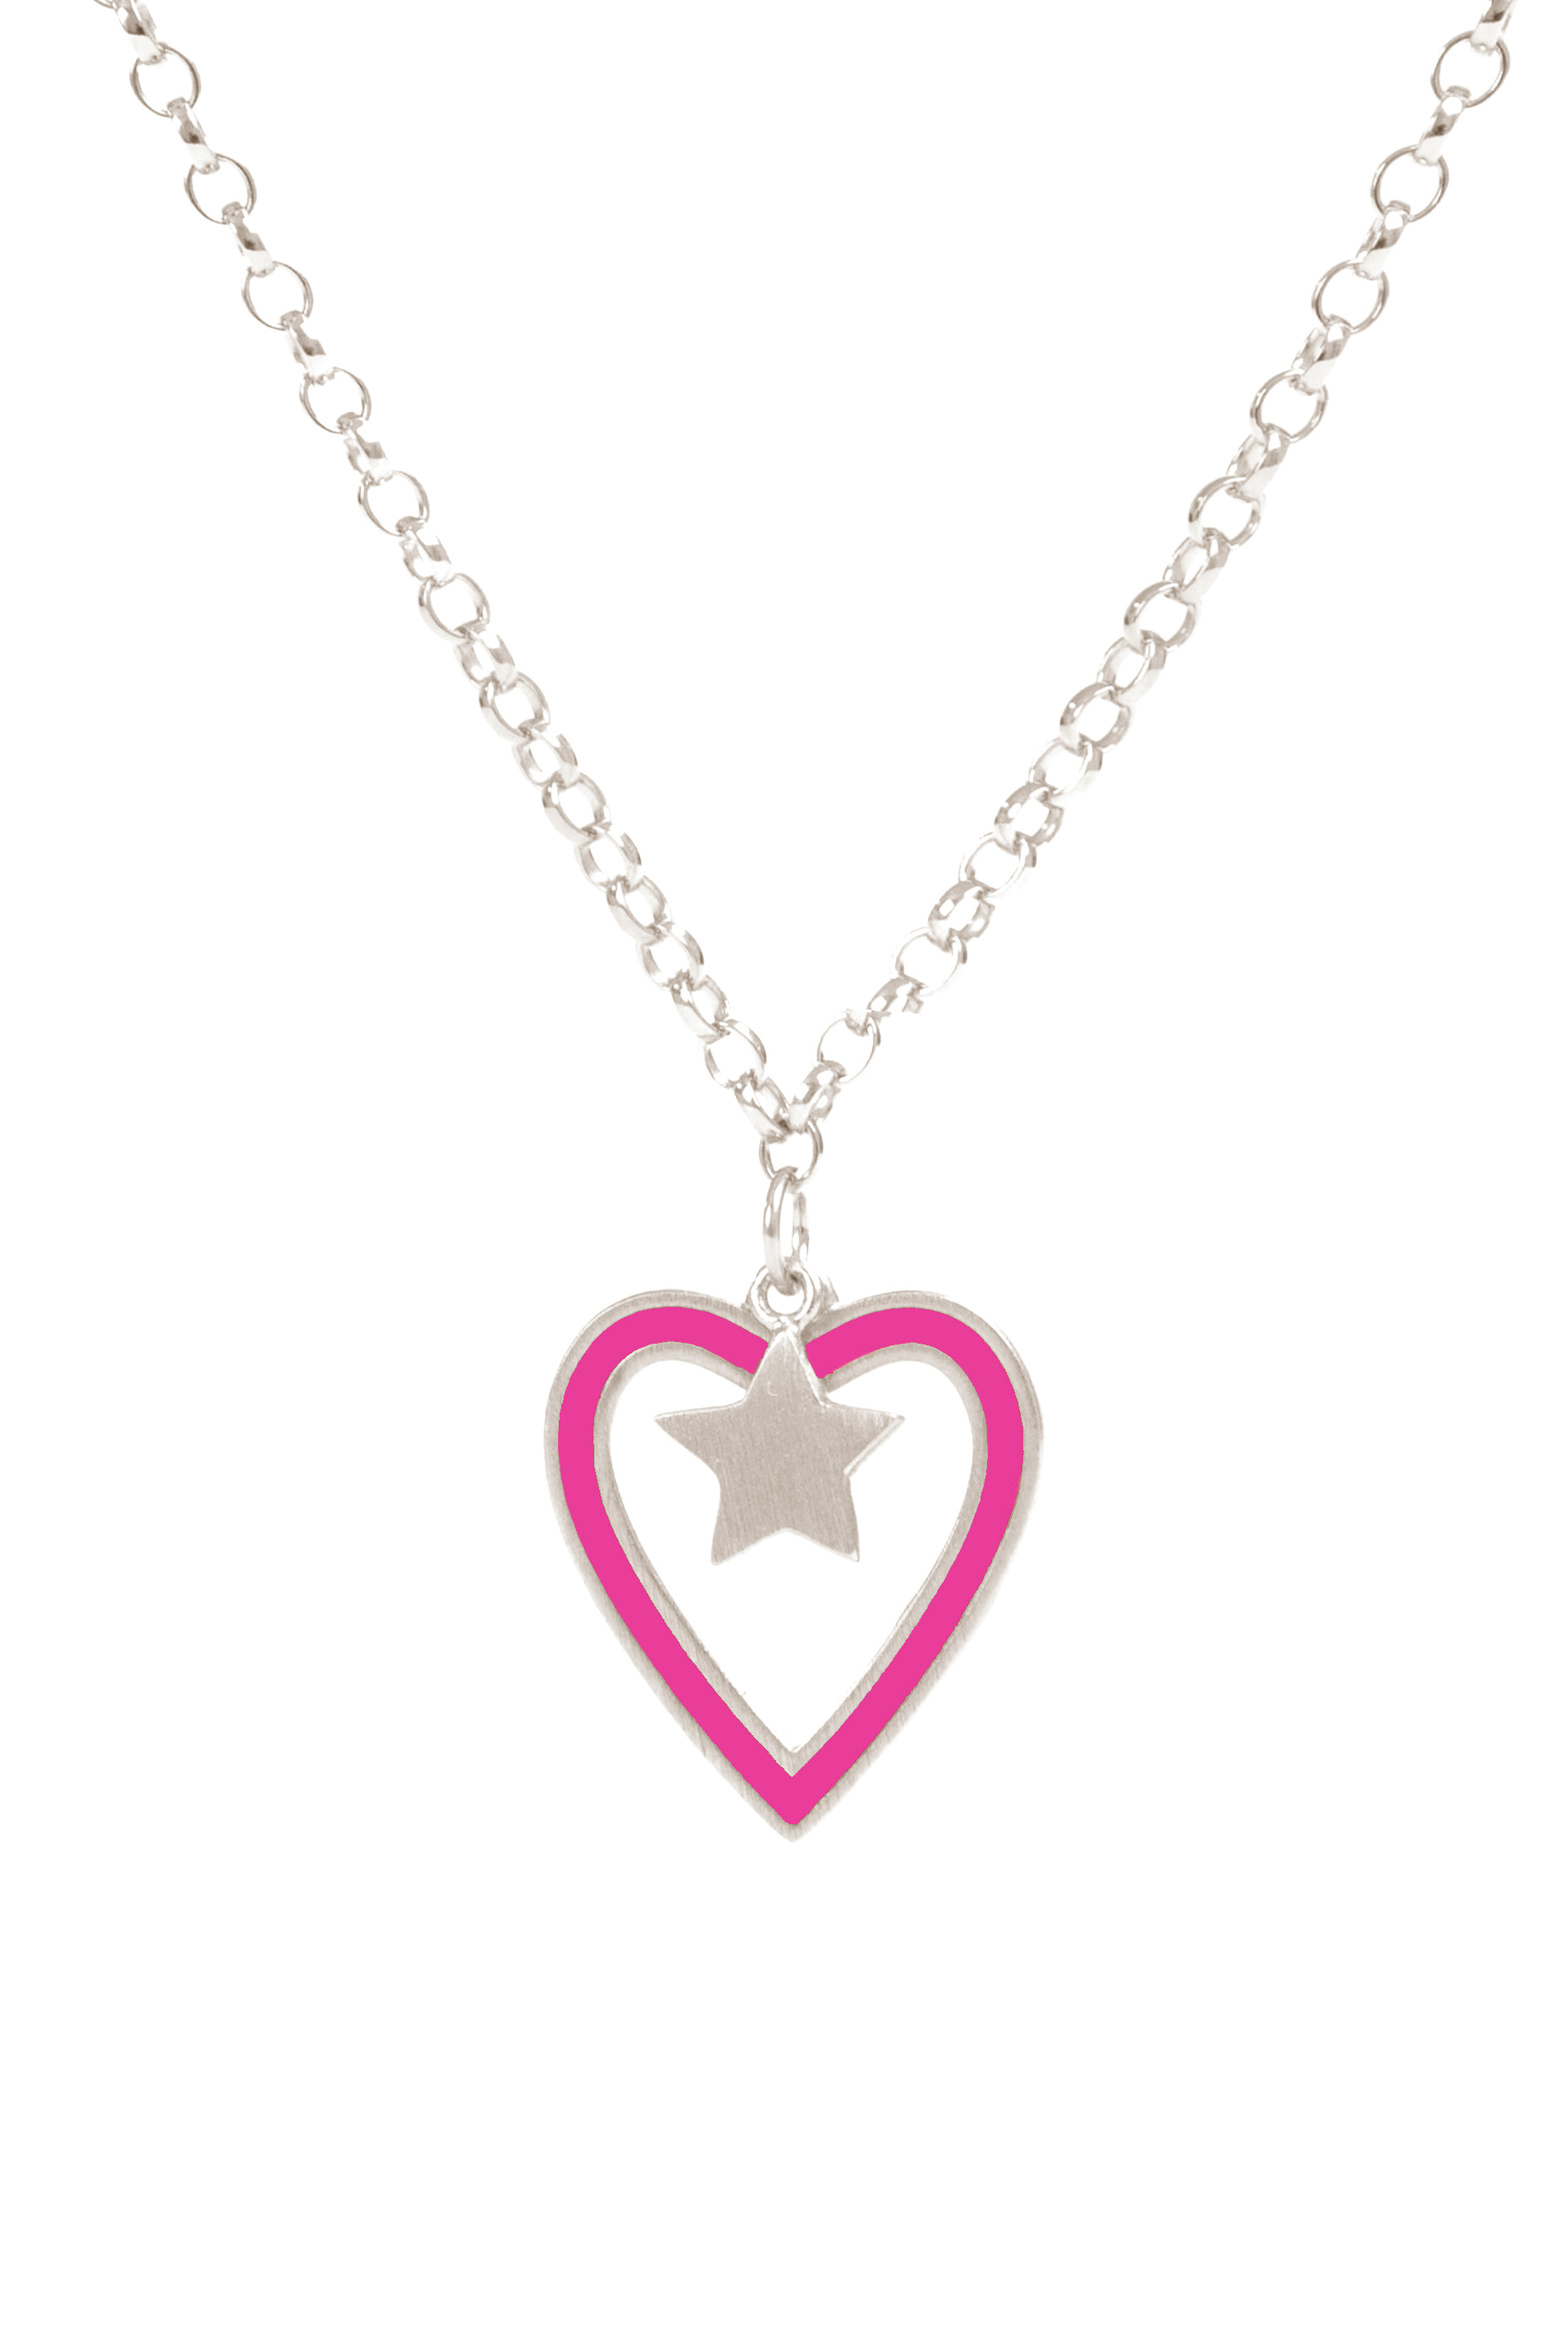 cb468_heart-necklace_silver_with_fucshia_edit_resized_final.jpg